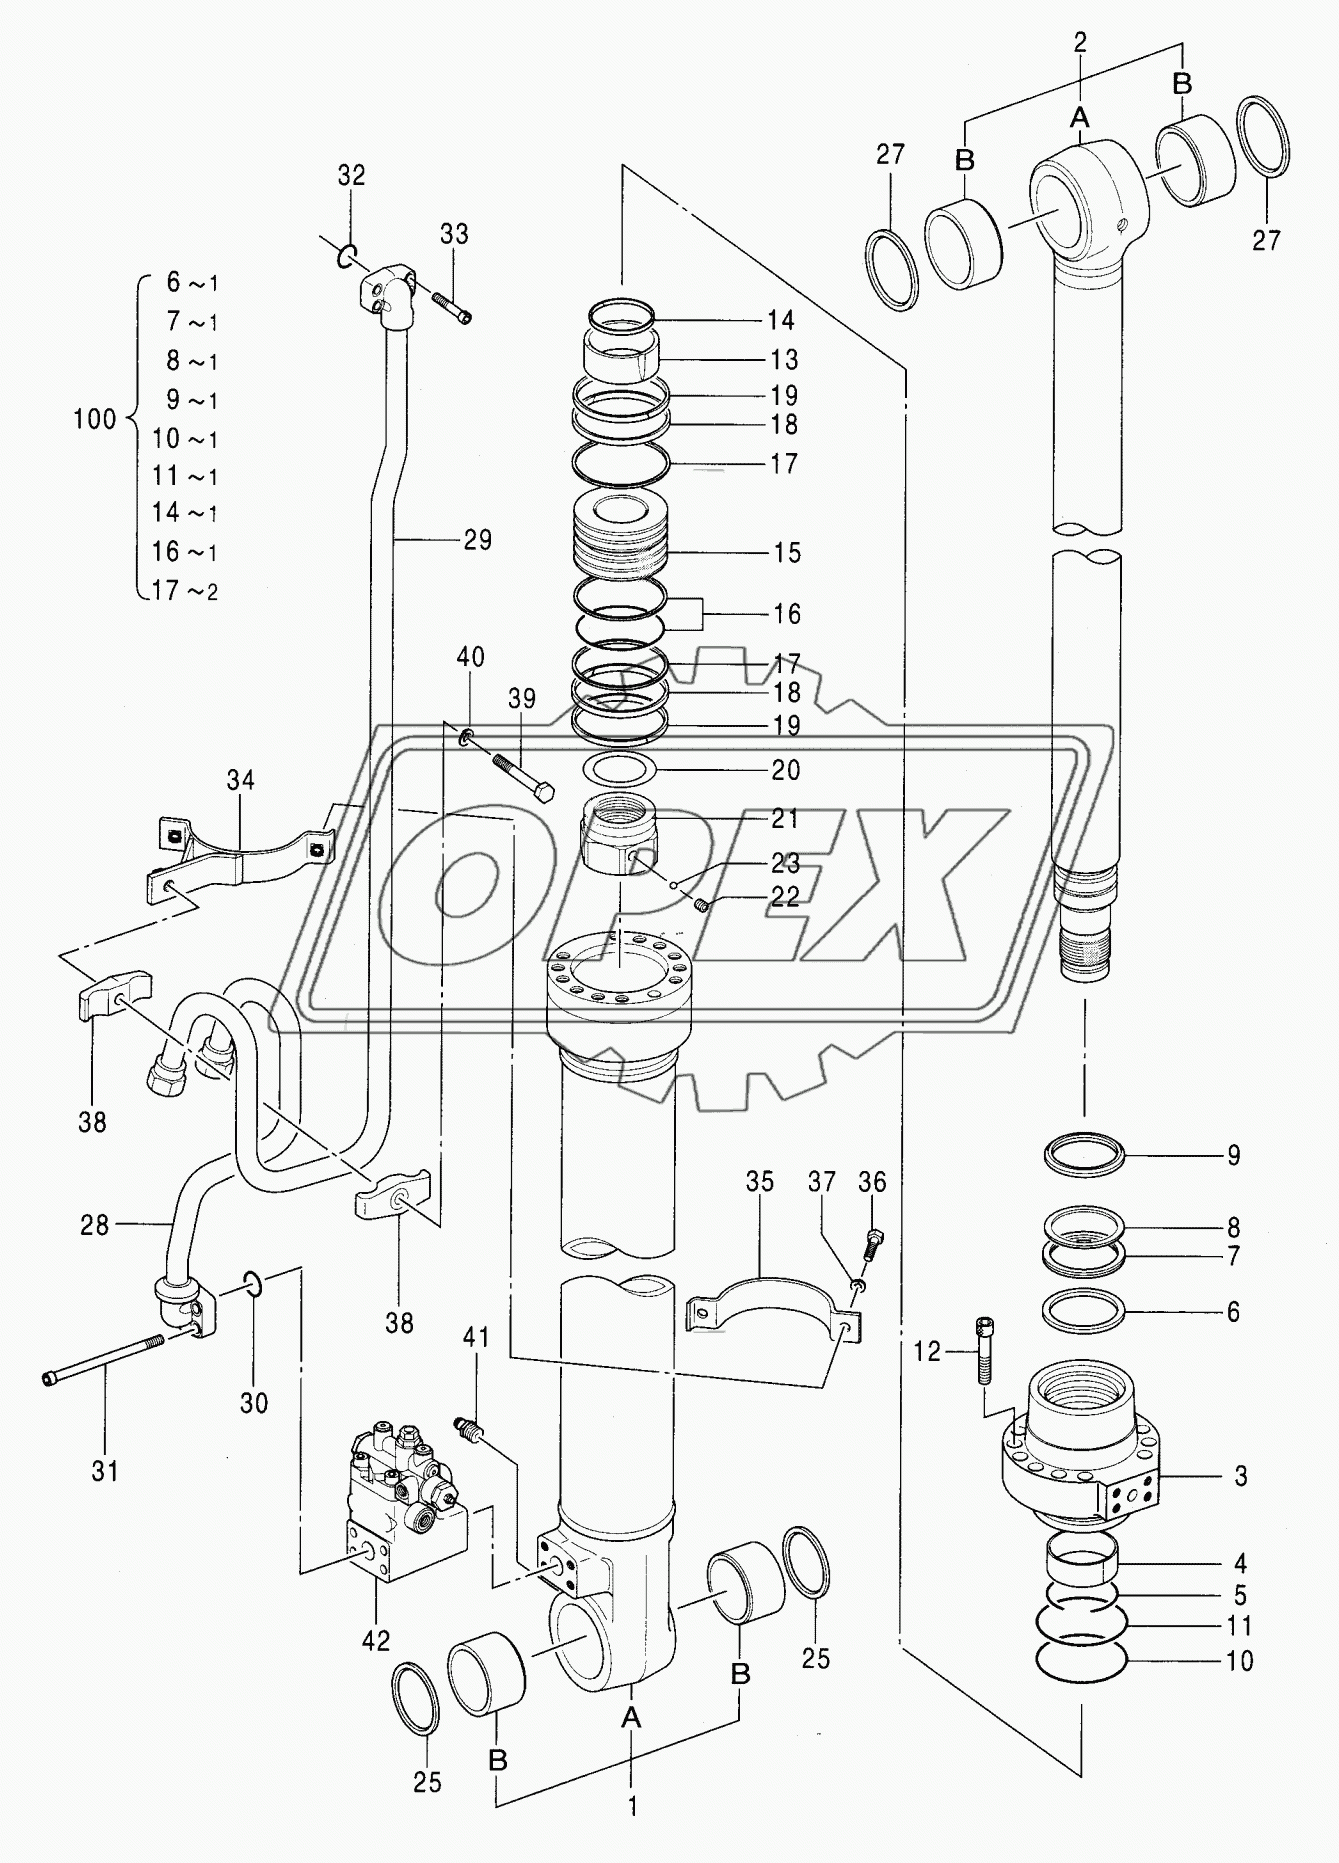 CYL., BOOM (R) (WITH HOLDING VALVE) (2P-B00M)